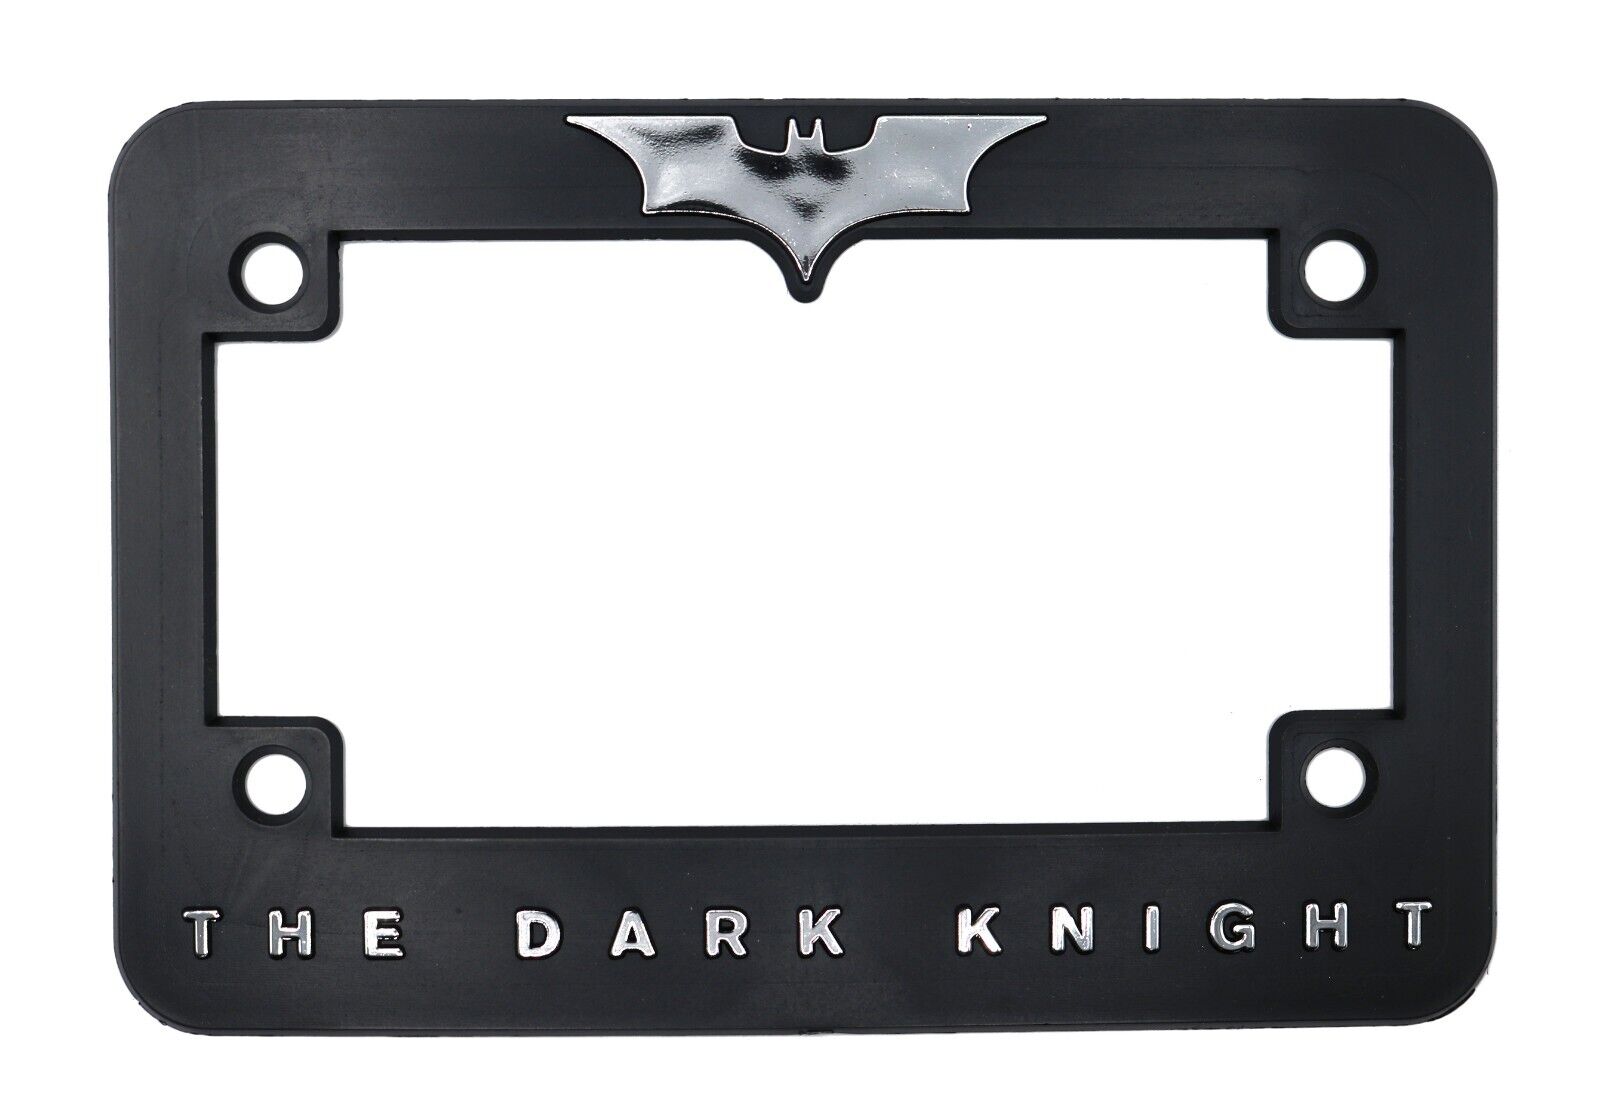 The Dark Knight for Batman 3D Raised Motorcycle License Plate Frame